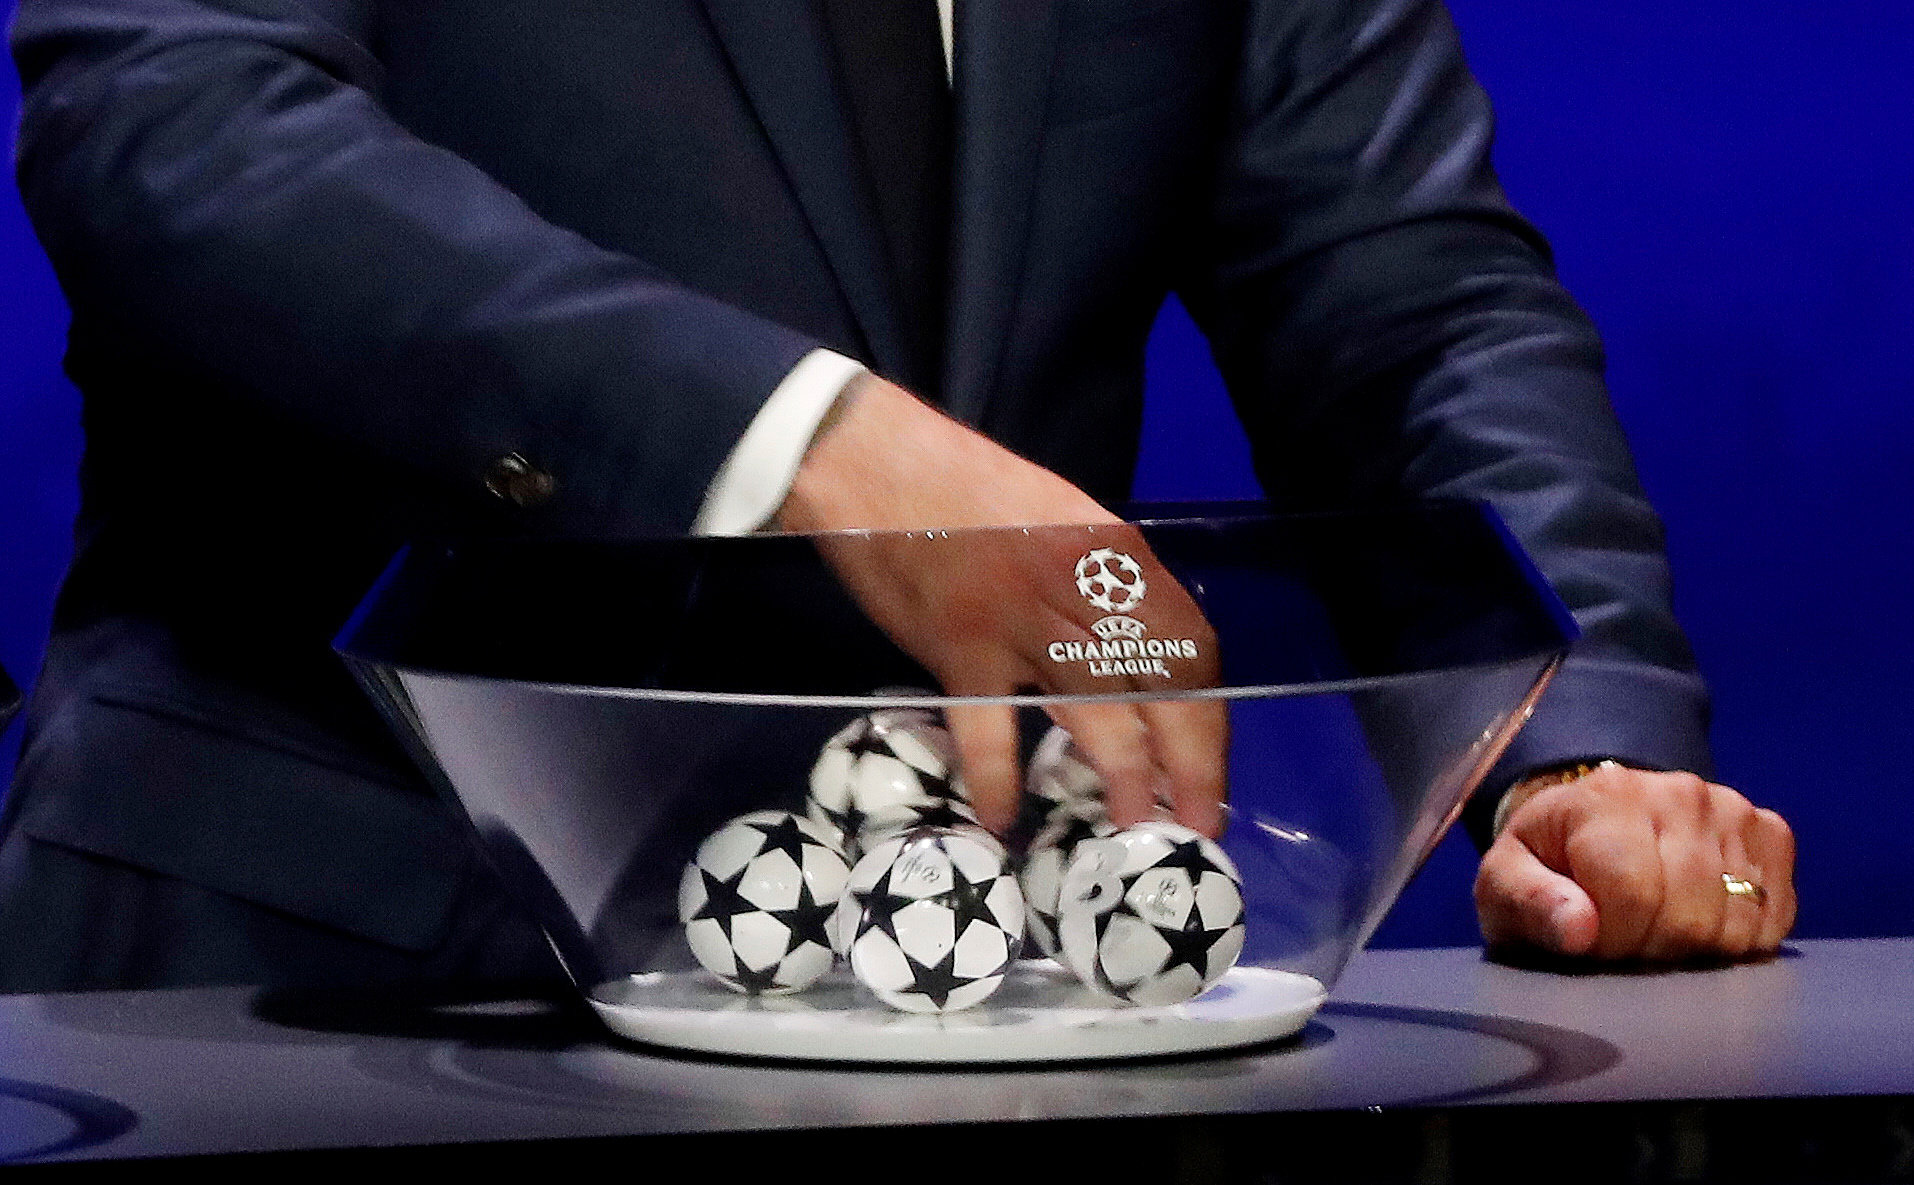 Champions League last 16 draw in full: Liverpool given Real Madrid re-match, difficult tests for Chelsea & Spurs